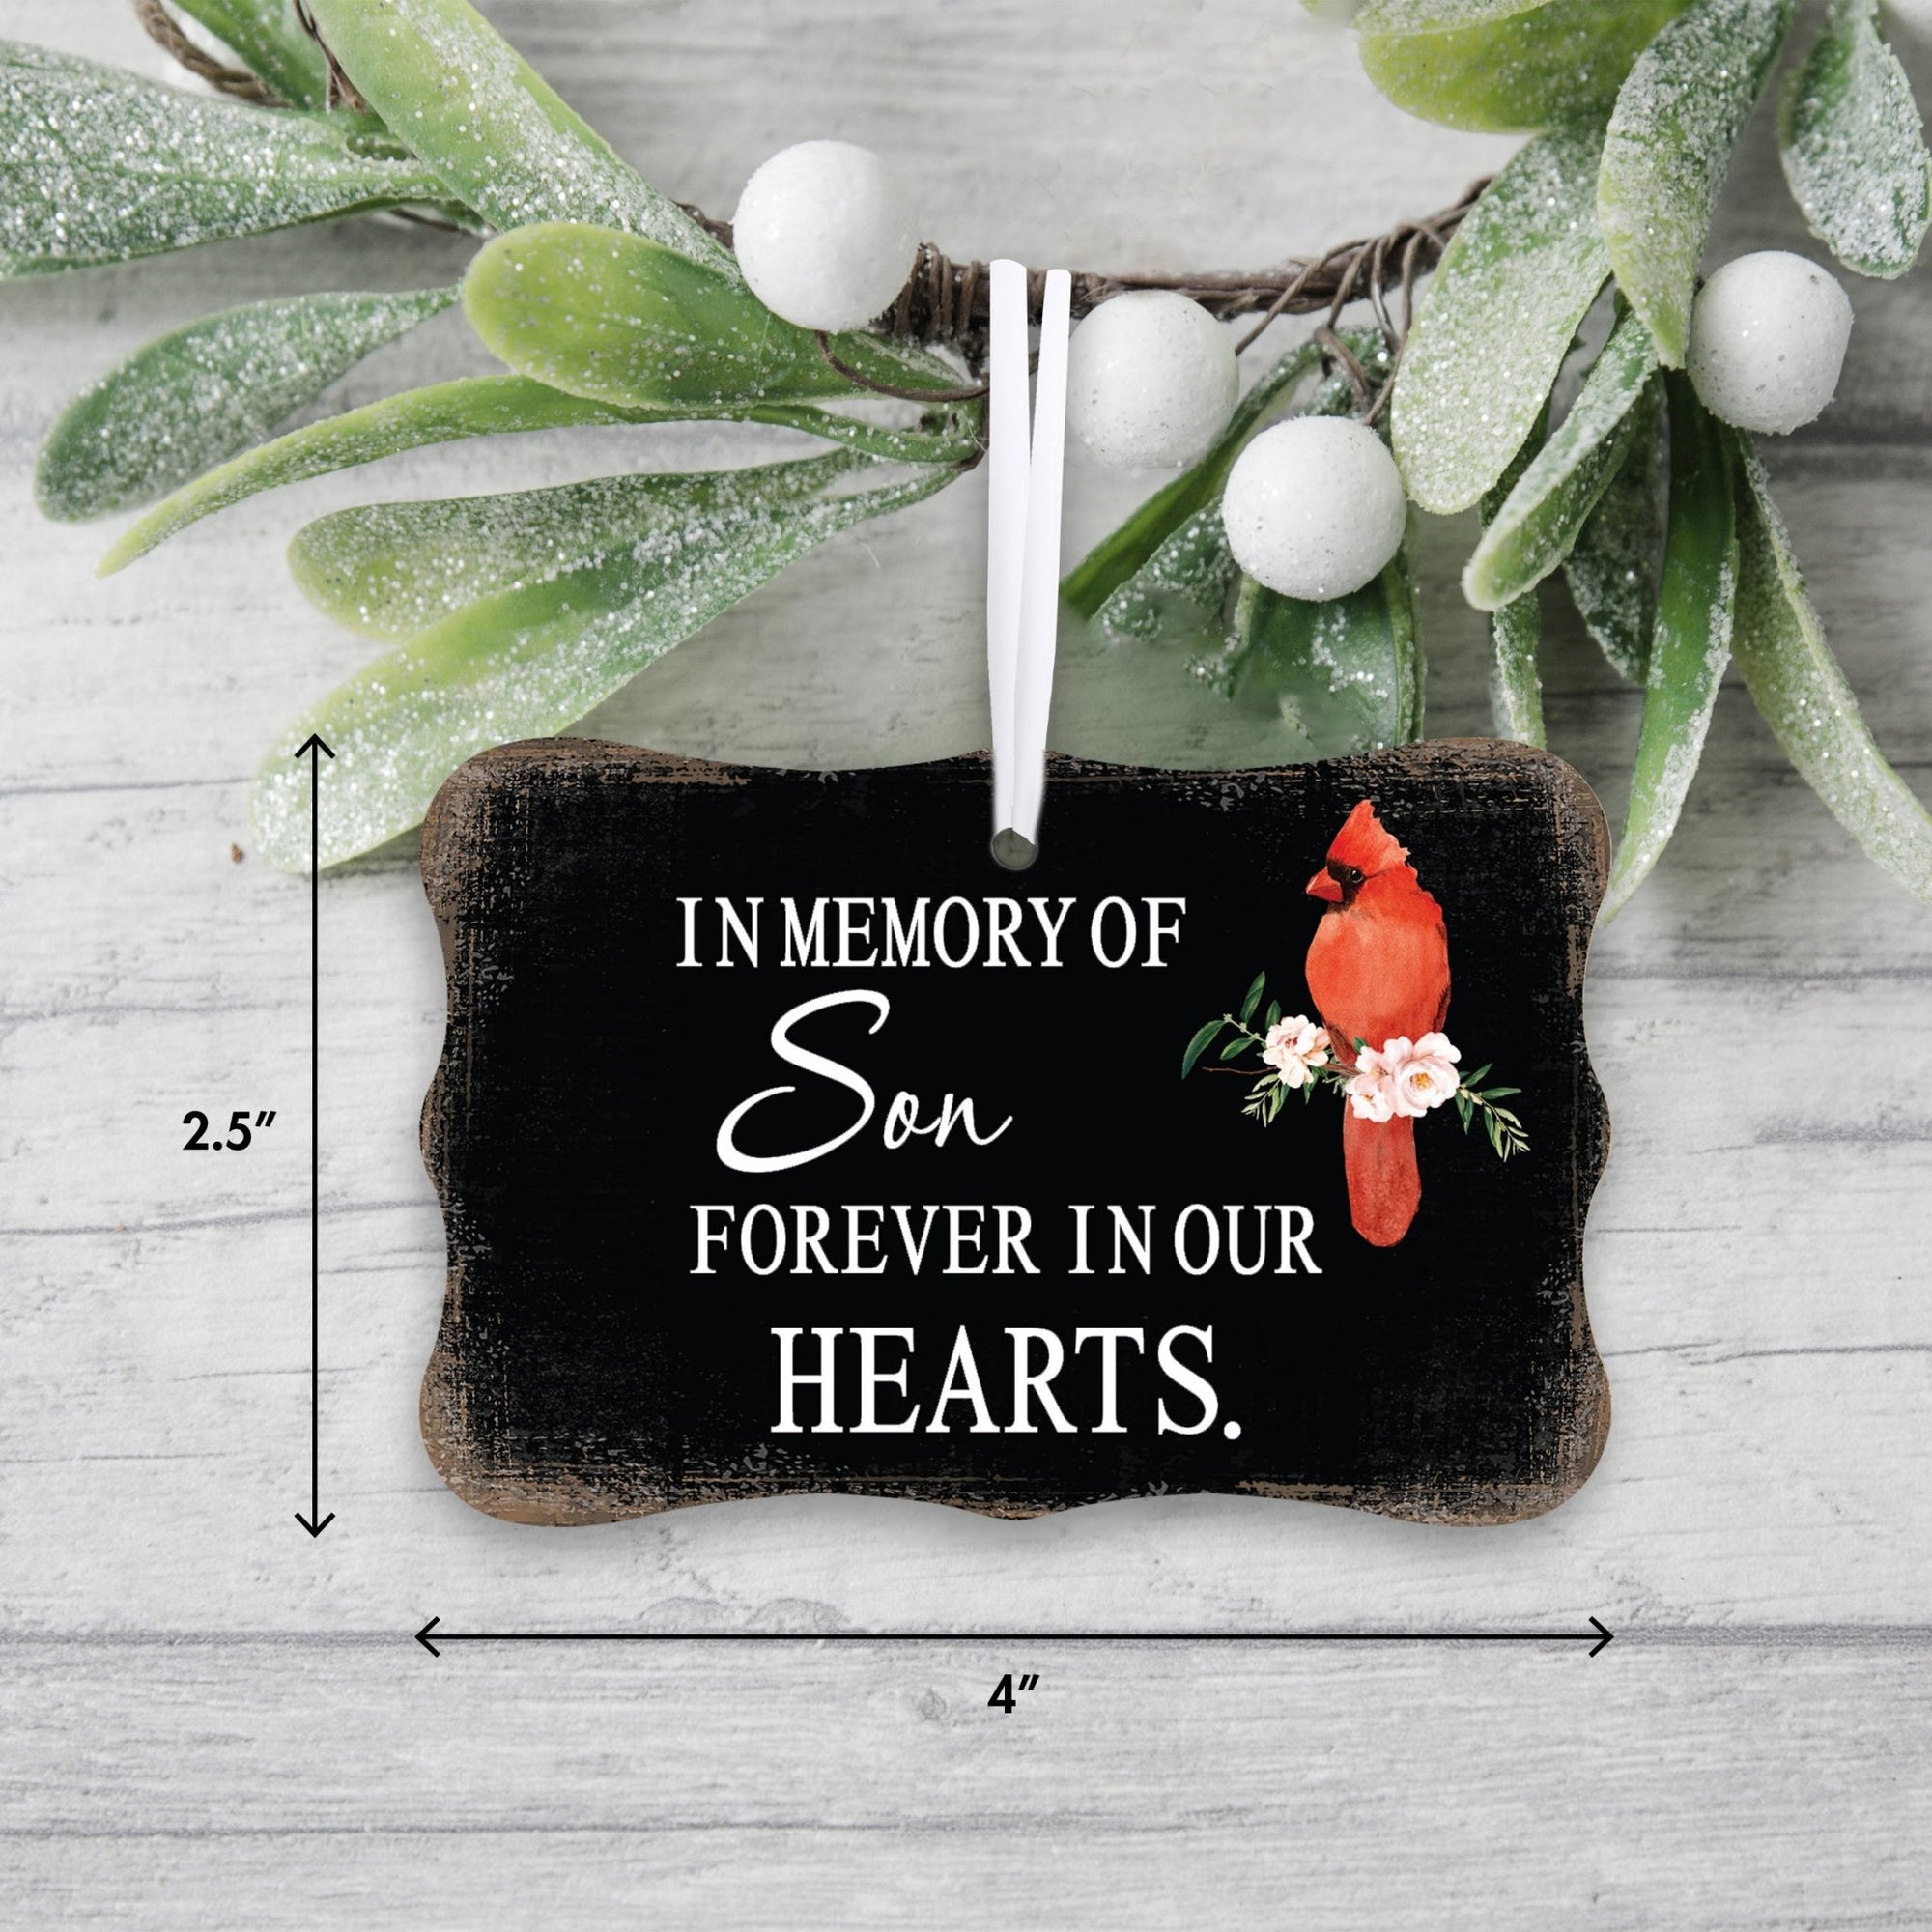 Custom Wooden Memorial Cardinal Ribbon Scalloped Ornament for Loss of Loved One - In Memory Of Son - LifeSong Milestones